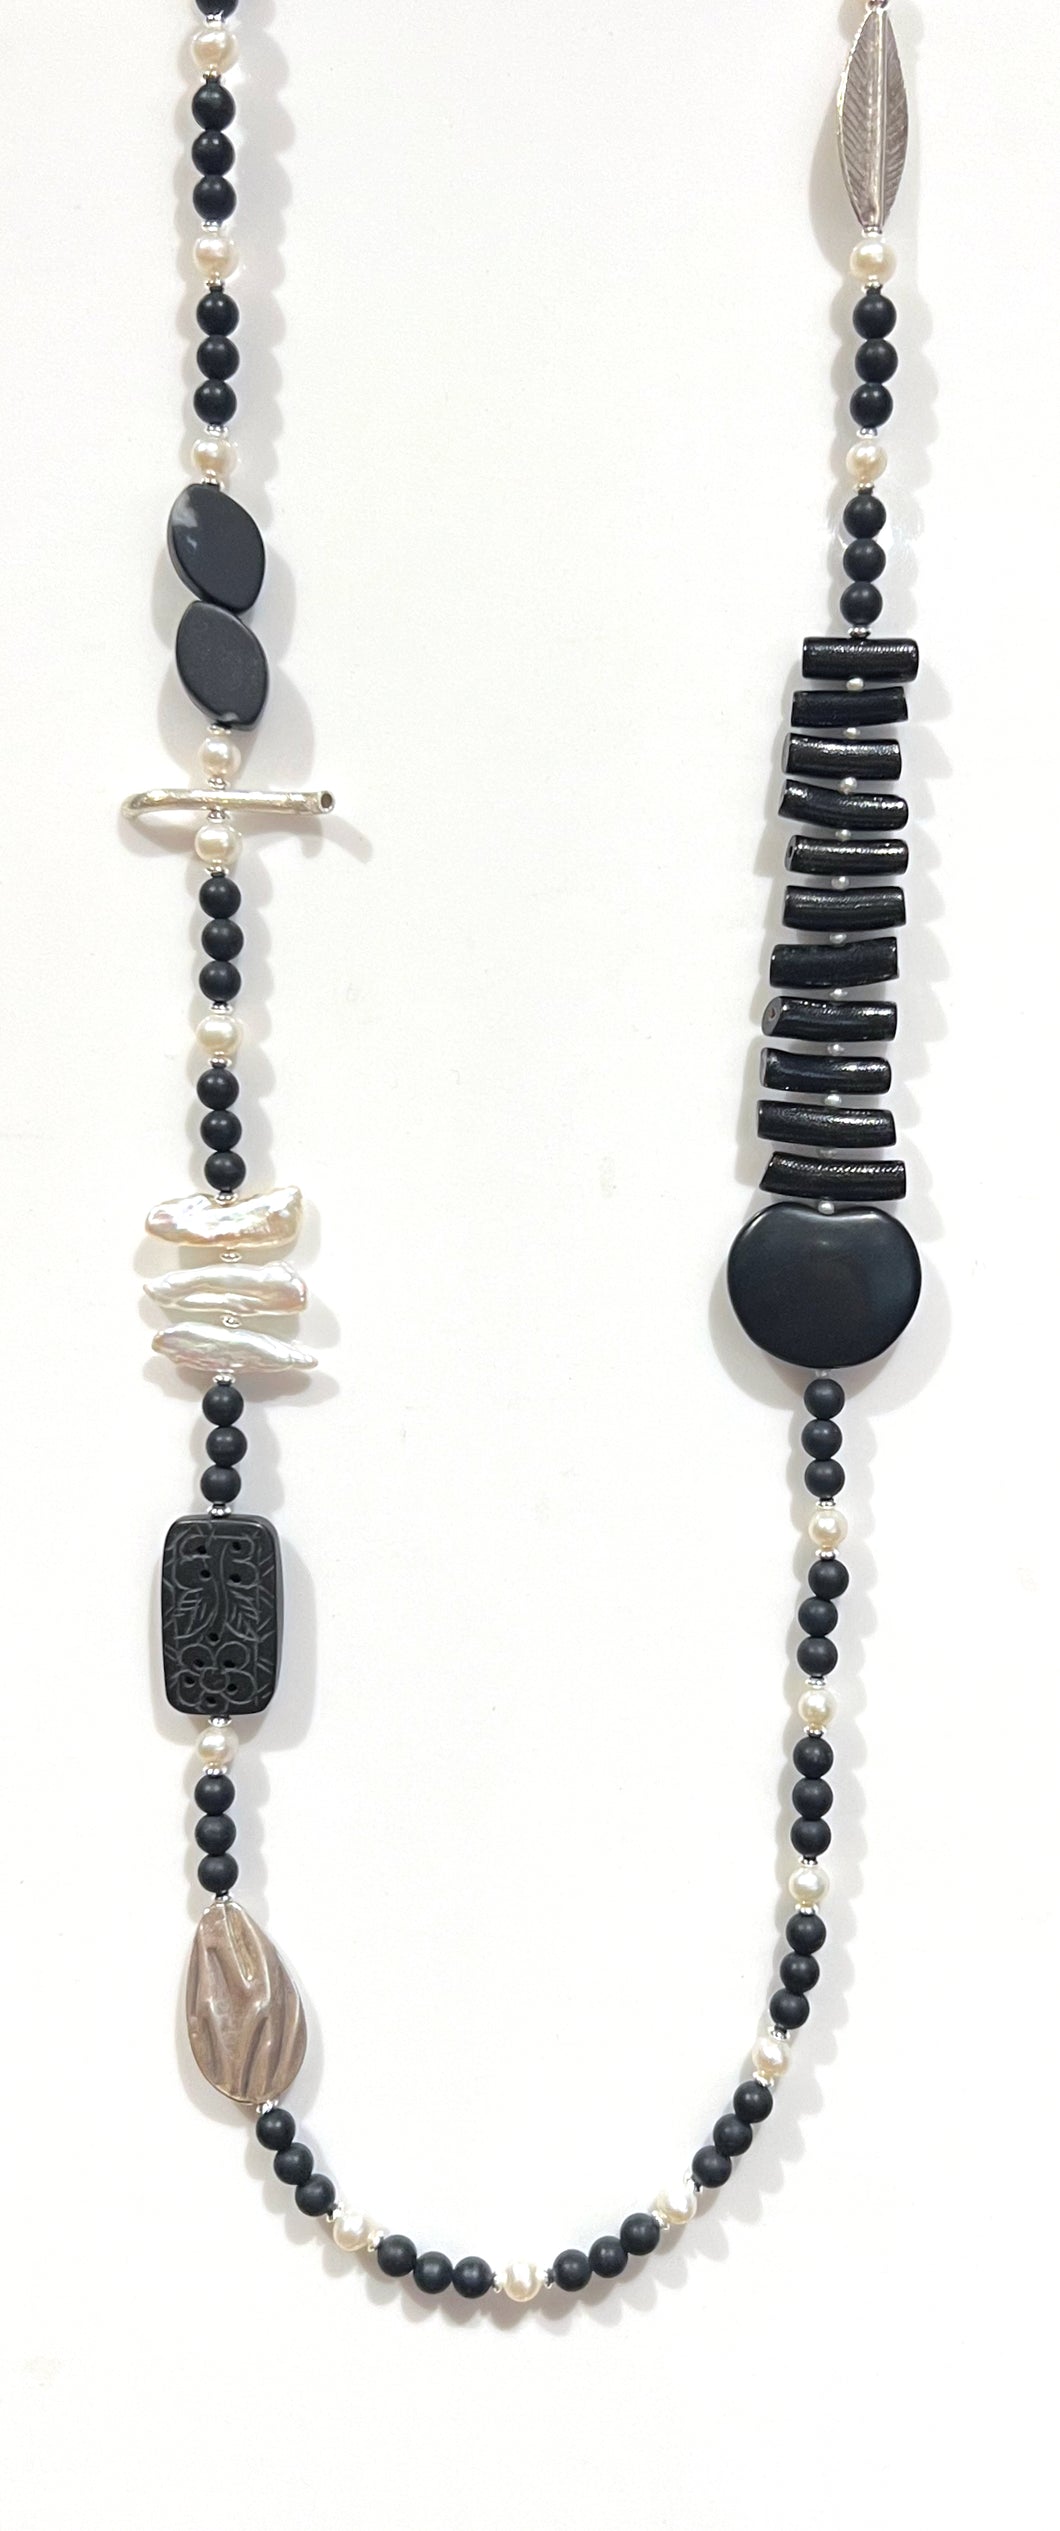 Australian Handmade Black Necklace with Matt Black Jade Agate Obsidian Pearls and Sterling Silver